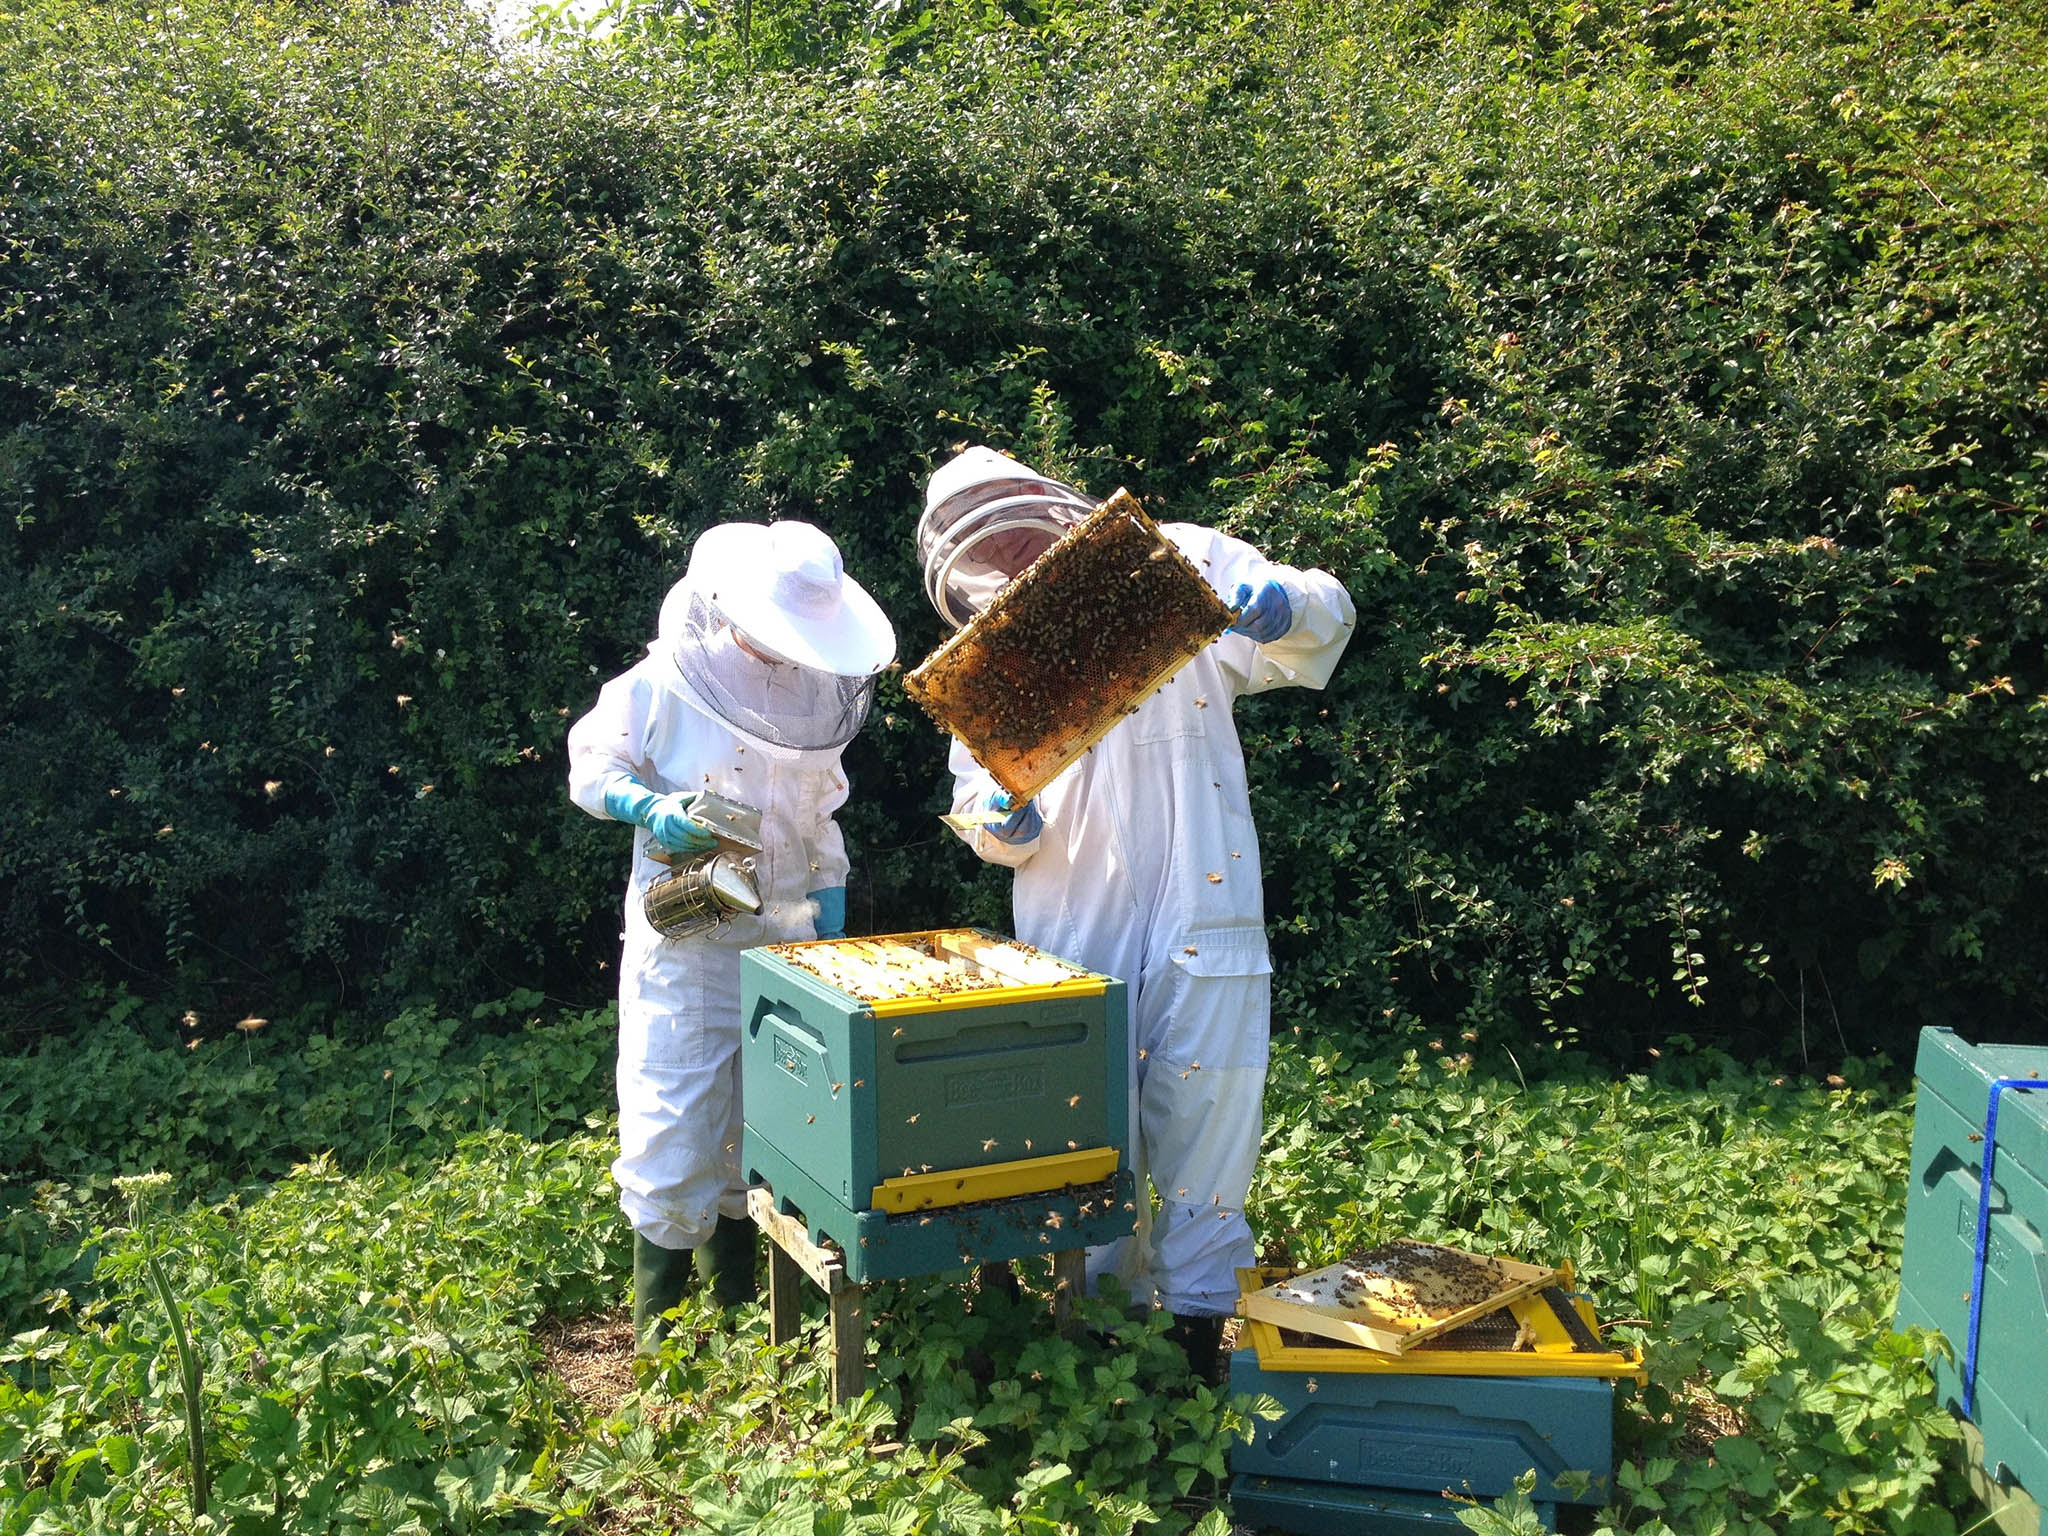 In 2015, there were just 270,000 hives in the UK, compared with nearly a million in 1900